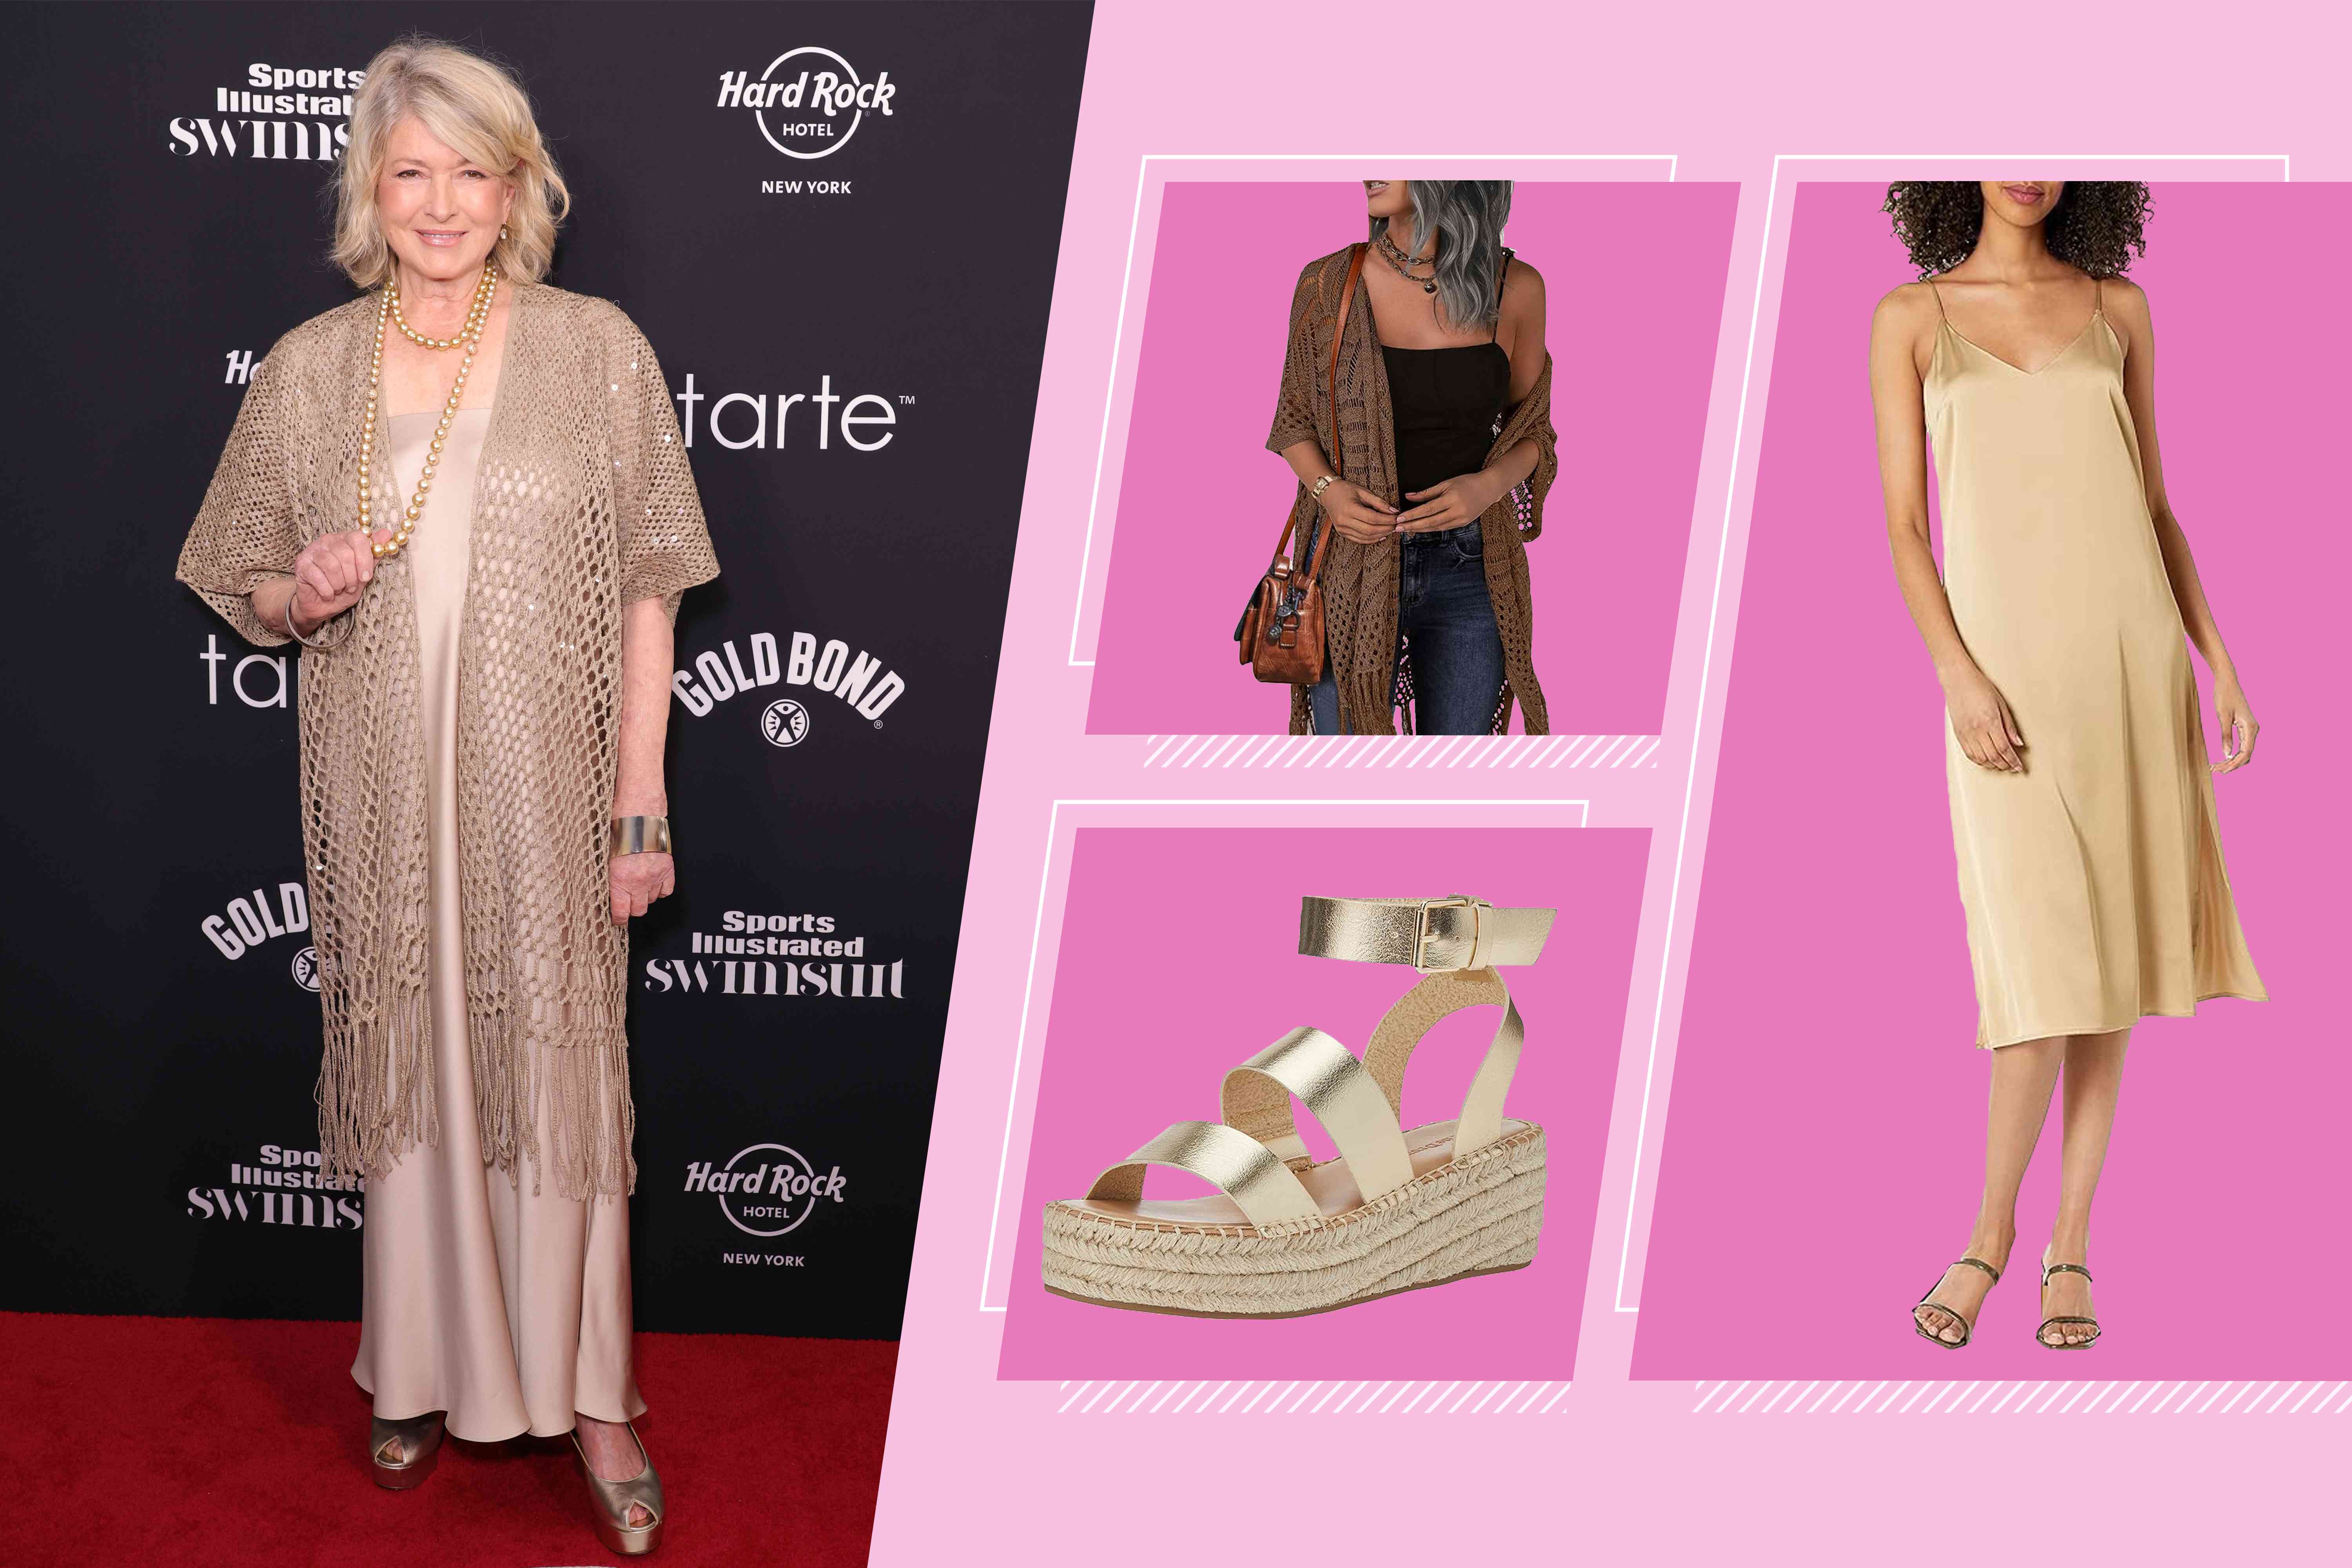 Martha Stewart's Red Carpet Look Included Three Pretty and Comfortable Pieces We Want to Wear to Summer Weddings